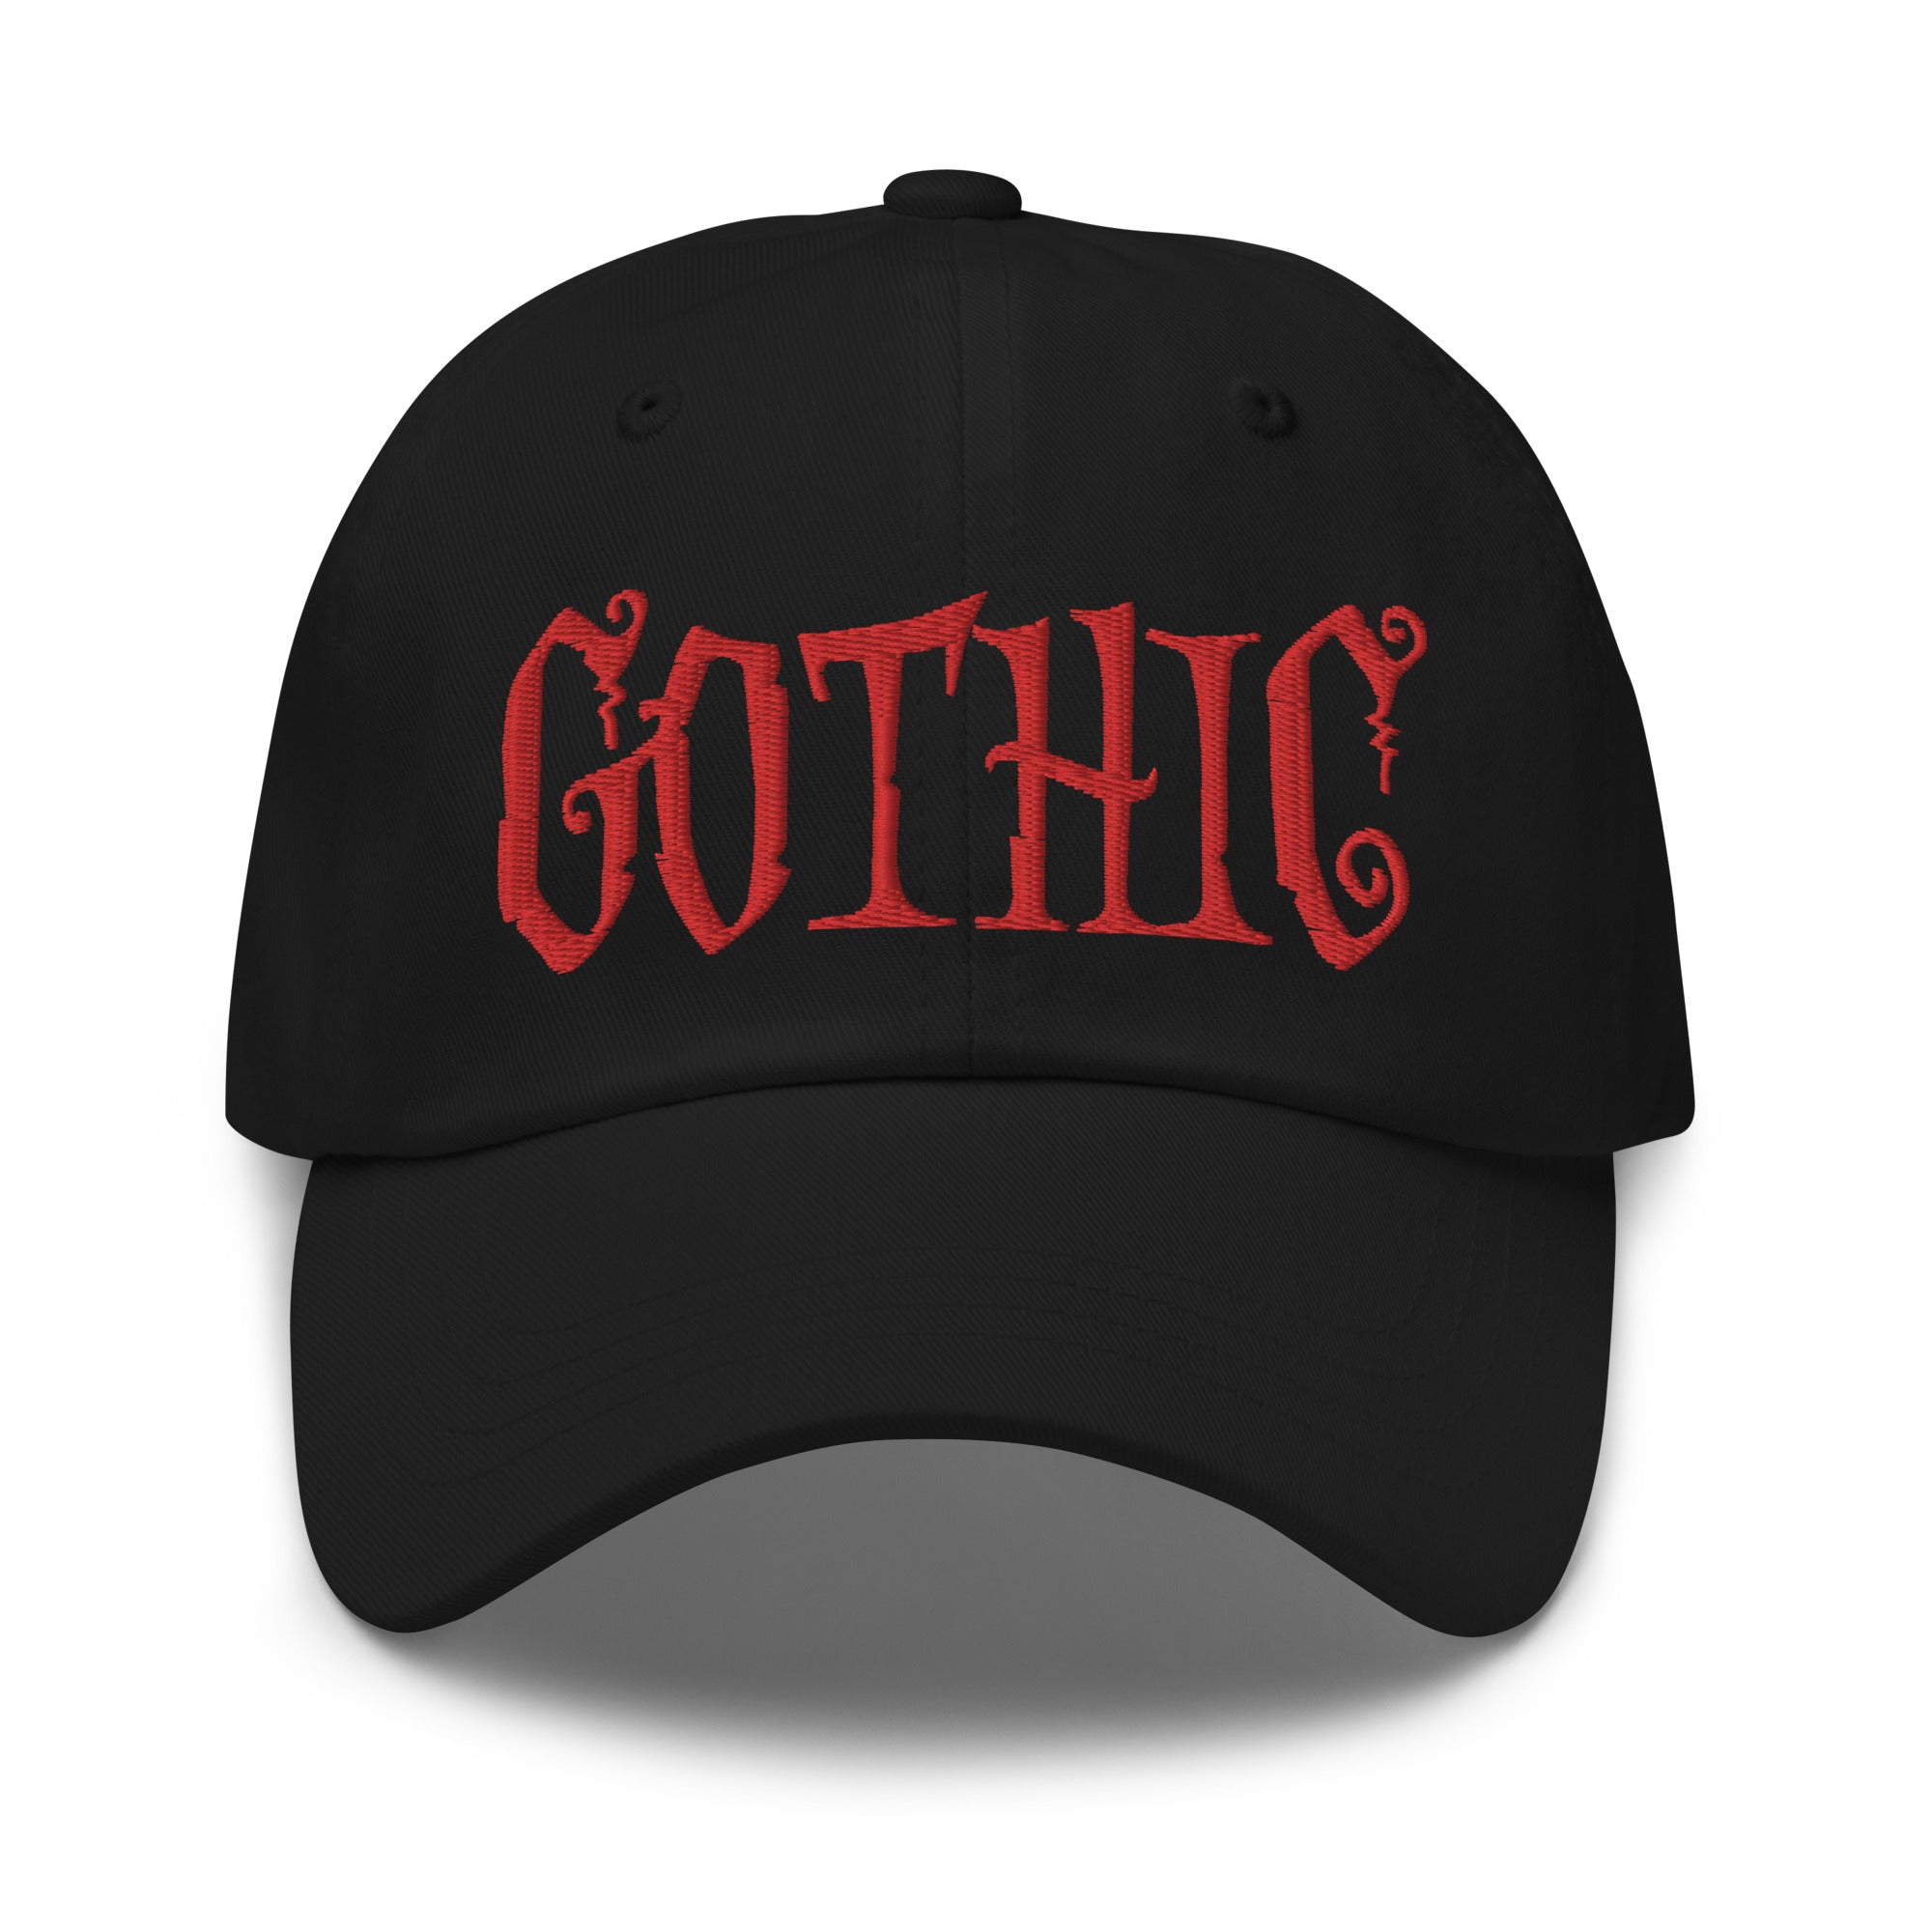 Gothic Dramatic Style Embroidered Baseball Cap Dark Goth Clothing Red Thread Dad hat - Edge of Life Designs